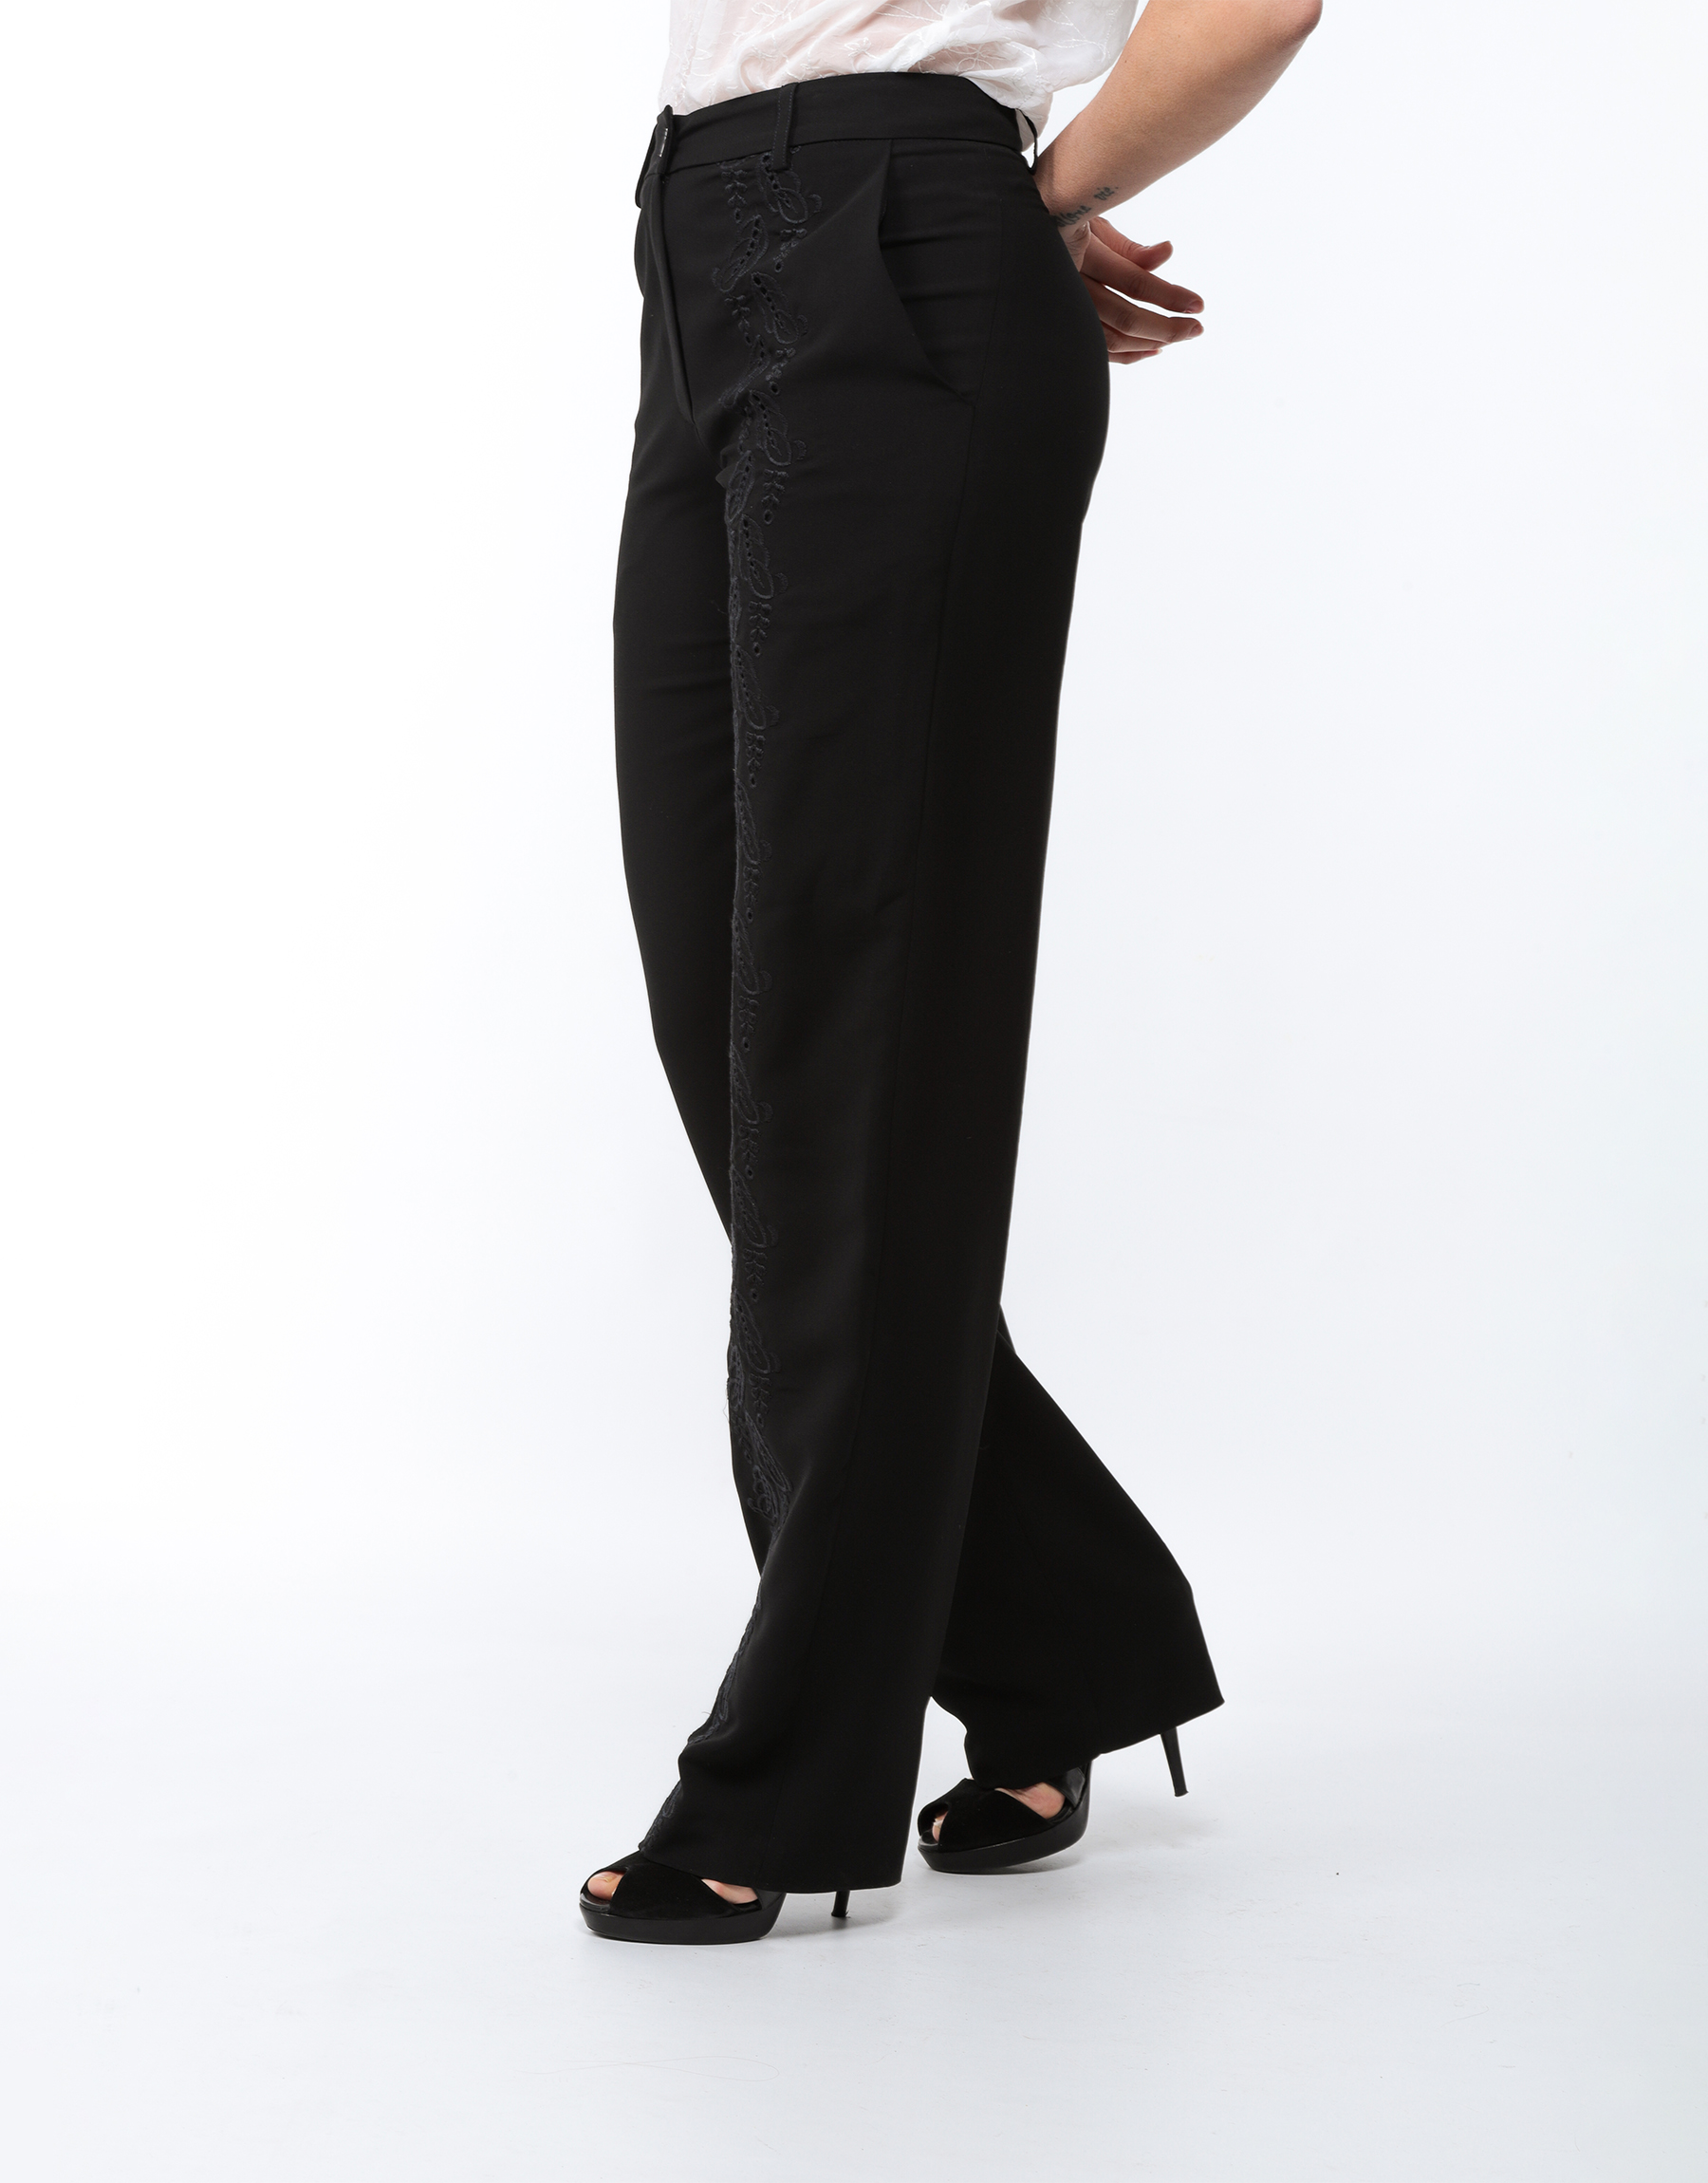 Straight trousers in black embroidered crepe